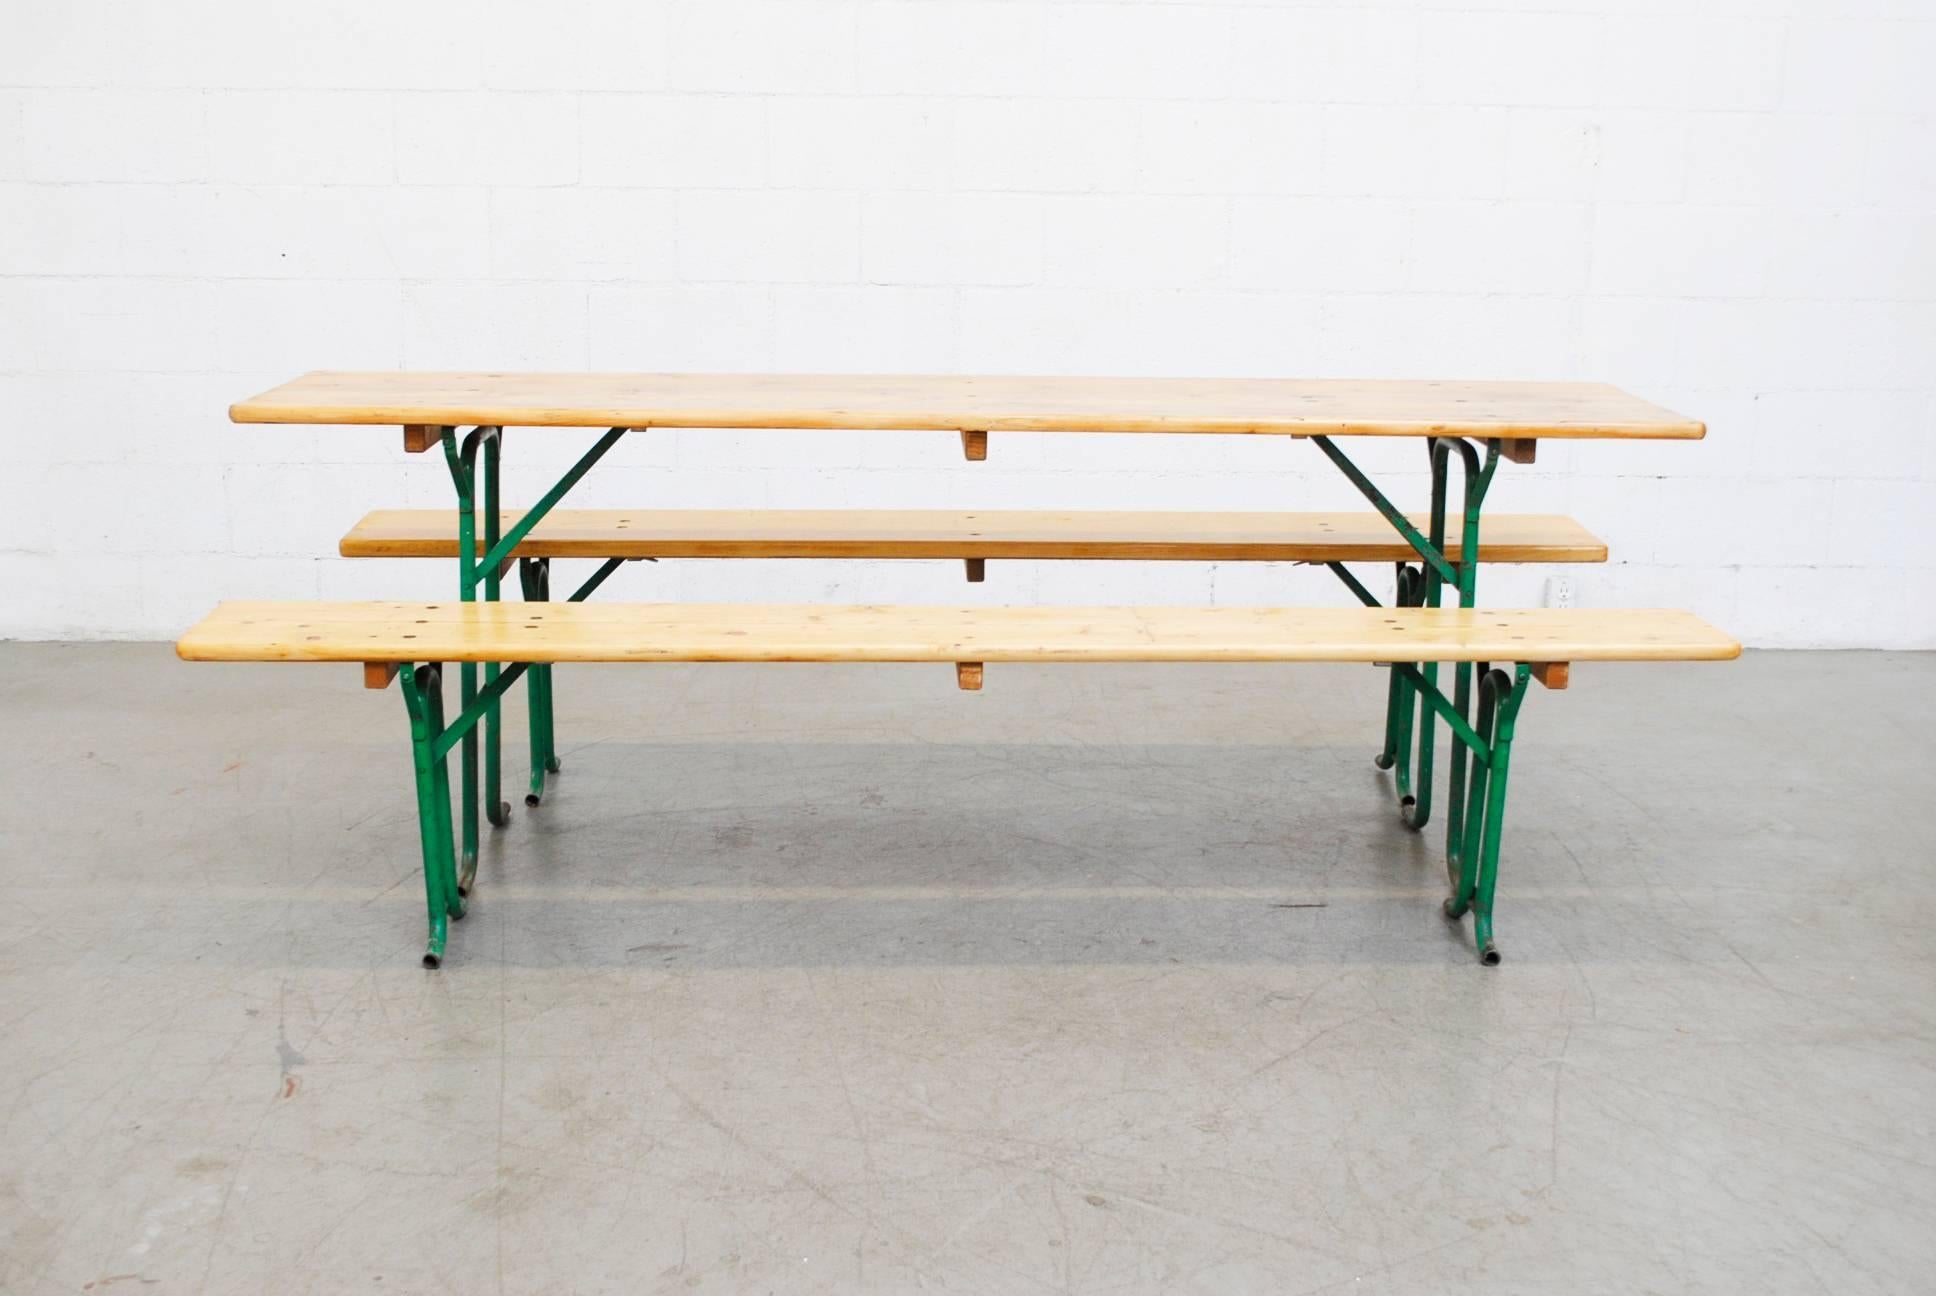 Natural wood German beer garden table and bench set. Newly refinished with marine coating. Tubular green enameled metal frames in original condition with visible wear. Similar sets available, listed separately. Benches measure 86.5 x 10.5 x 18.5.